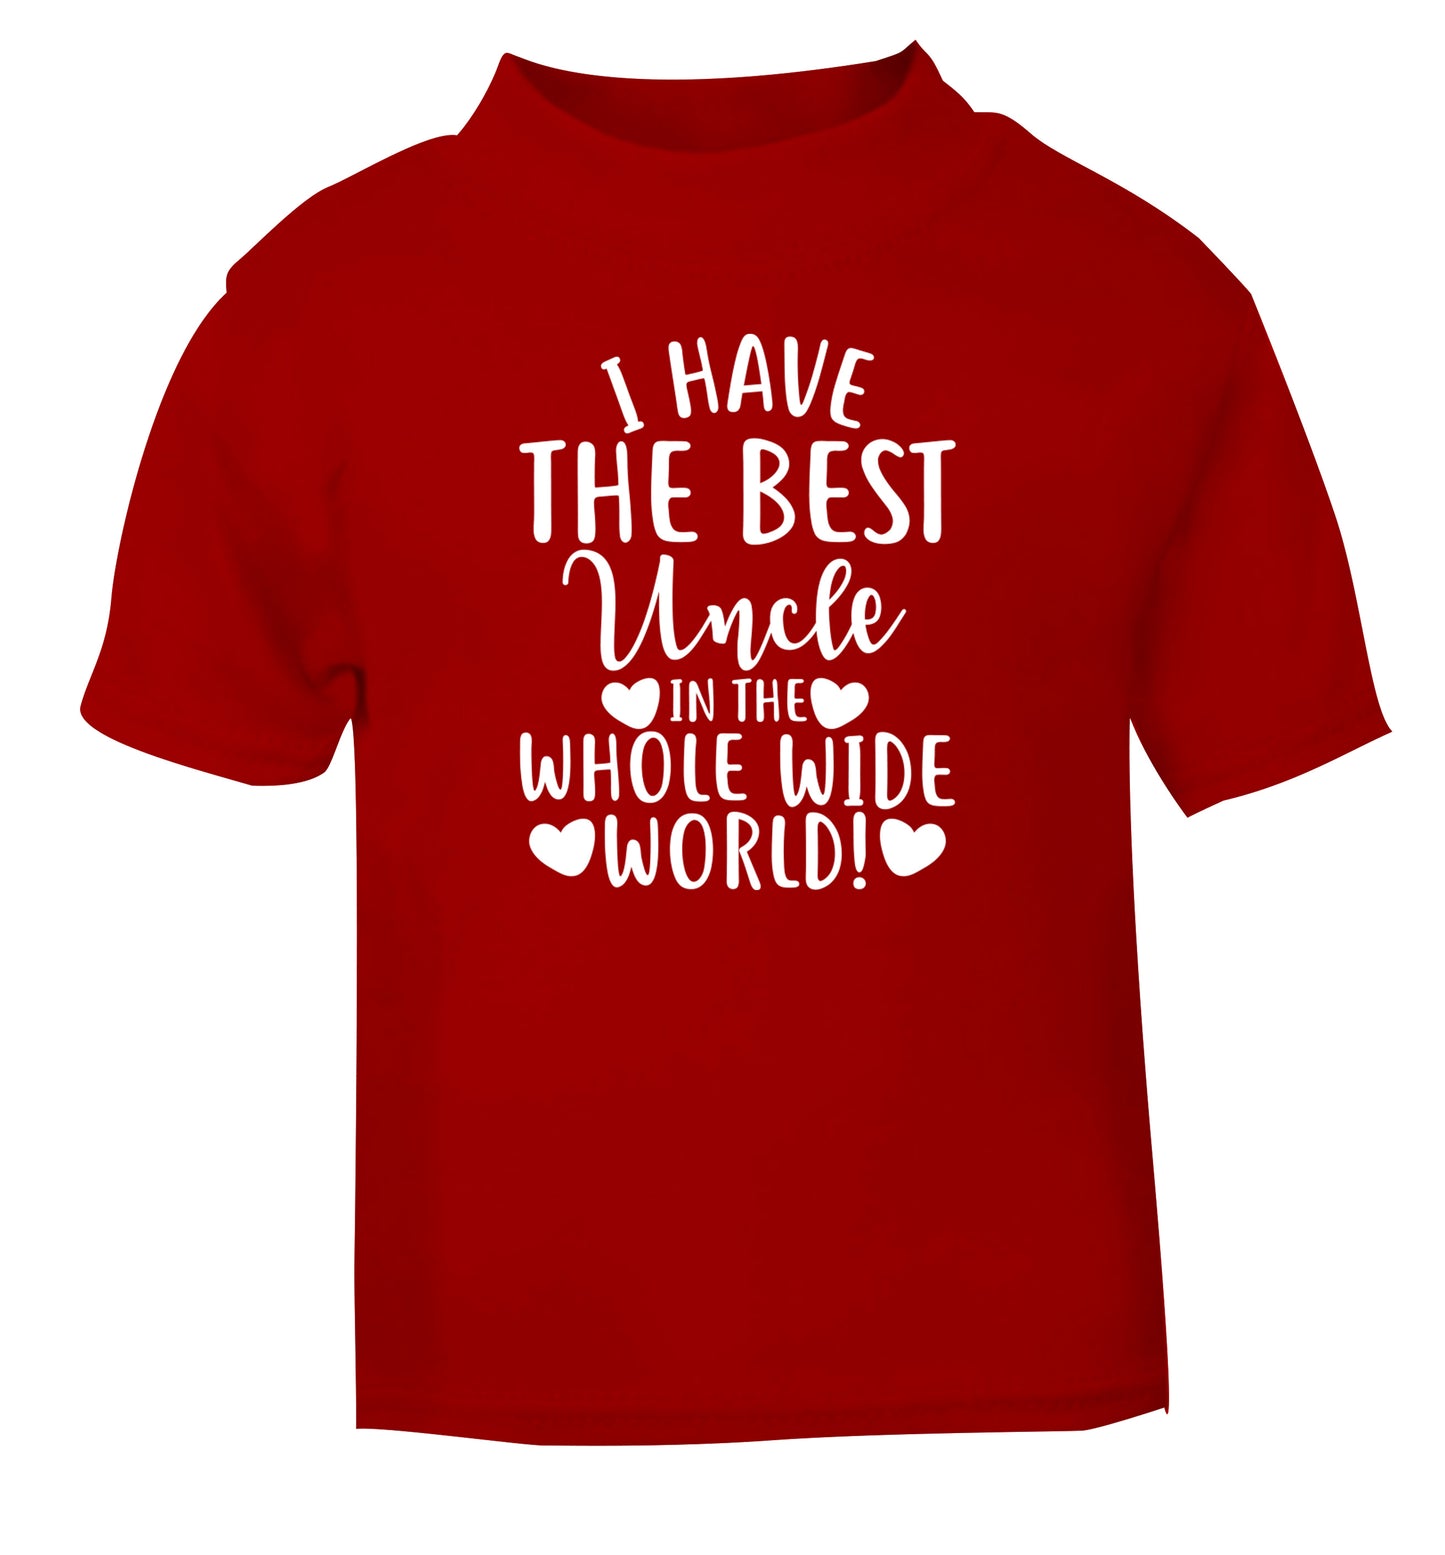 I have the best uncle in the whole wide world! red Baby Toddler Tshirt 2 Years